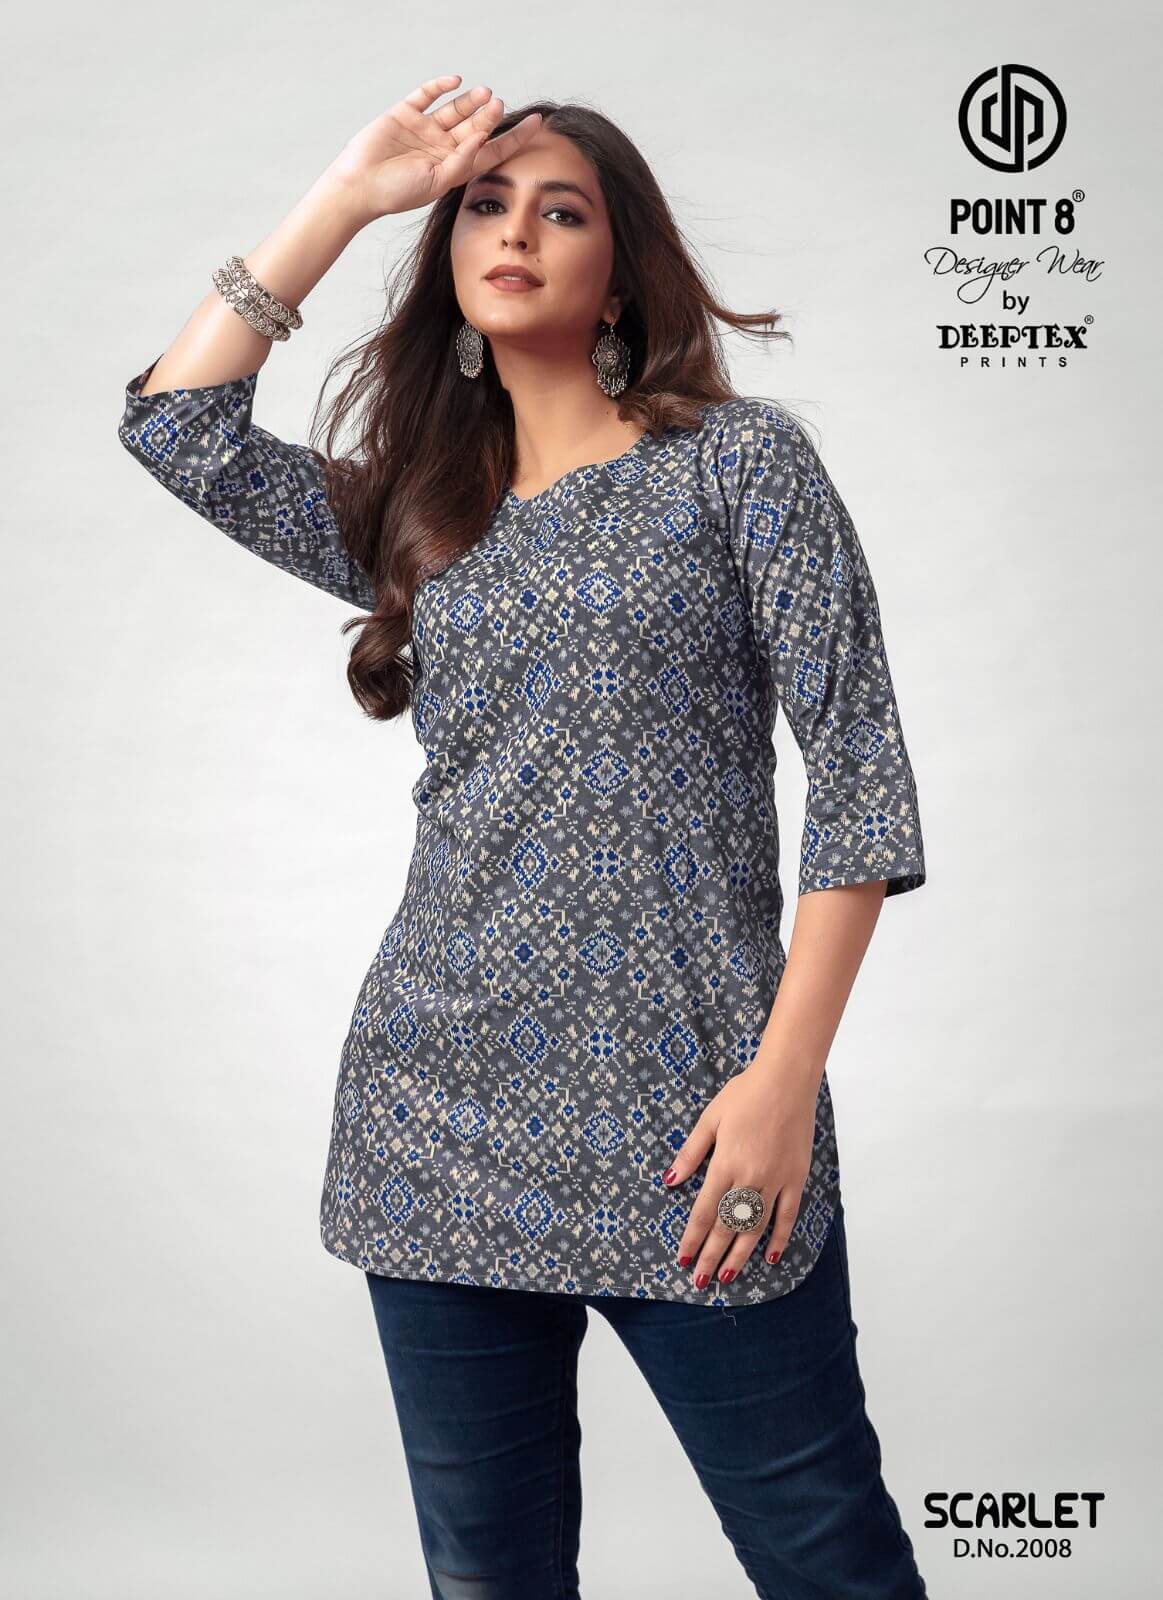 Deeptex Point 8 Scarlet vol 2 Ladies Tops Catalog collection 6